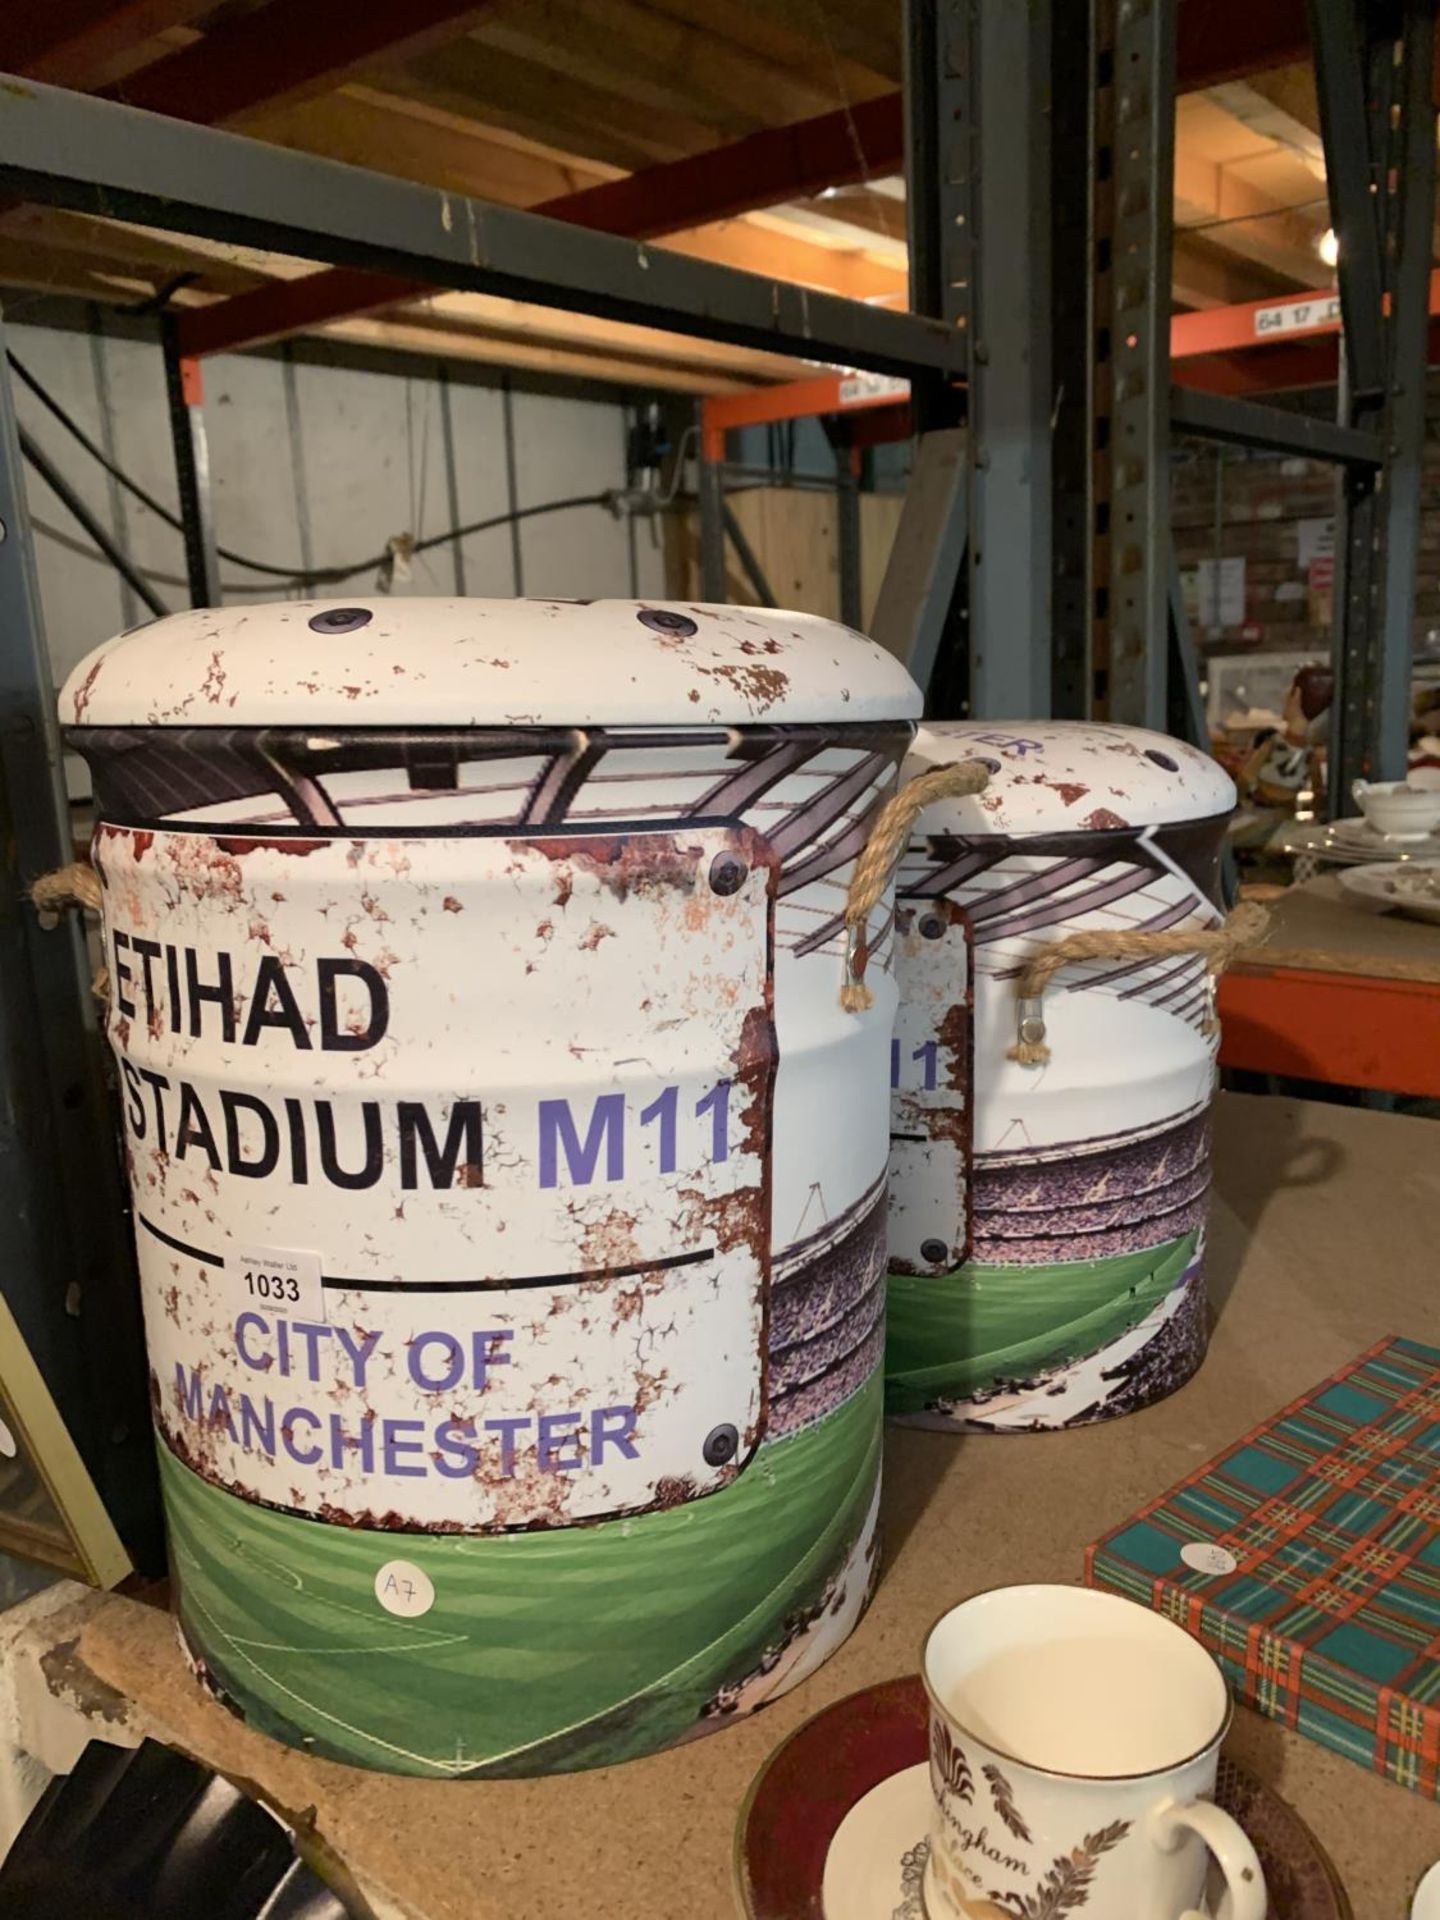 TWO MANCHESTER CITY ETHIAD STADIUM FOOTBALL STORAGE AND STACKING STOOLS